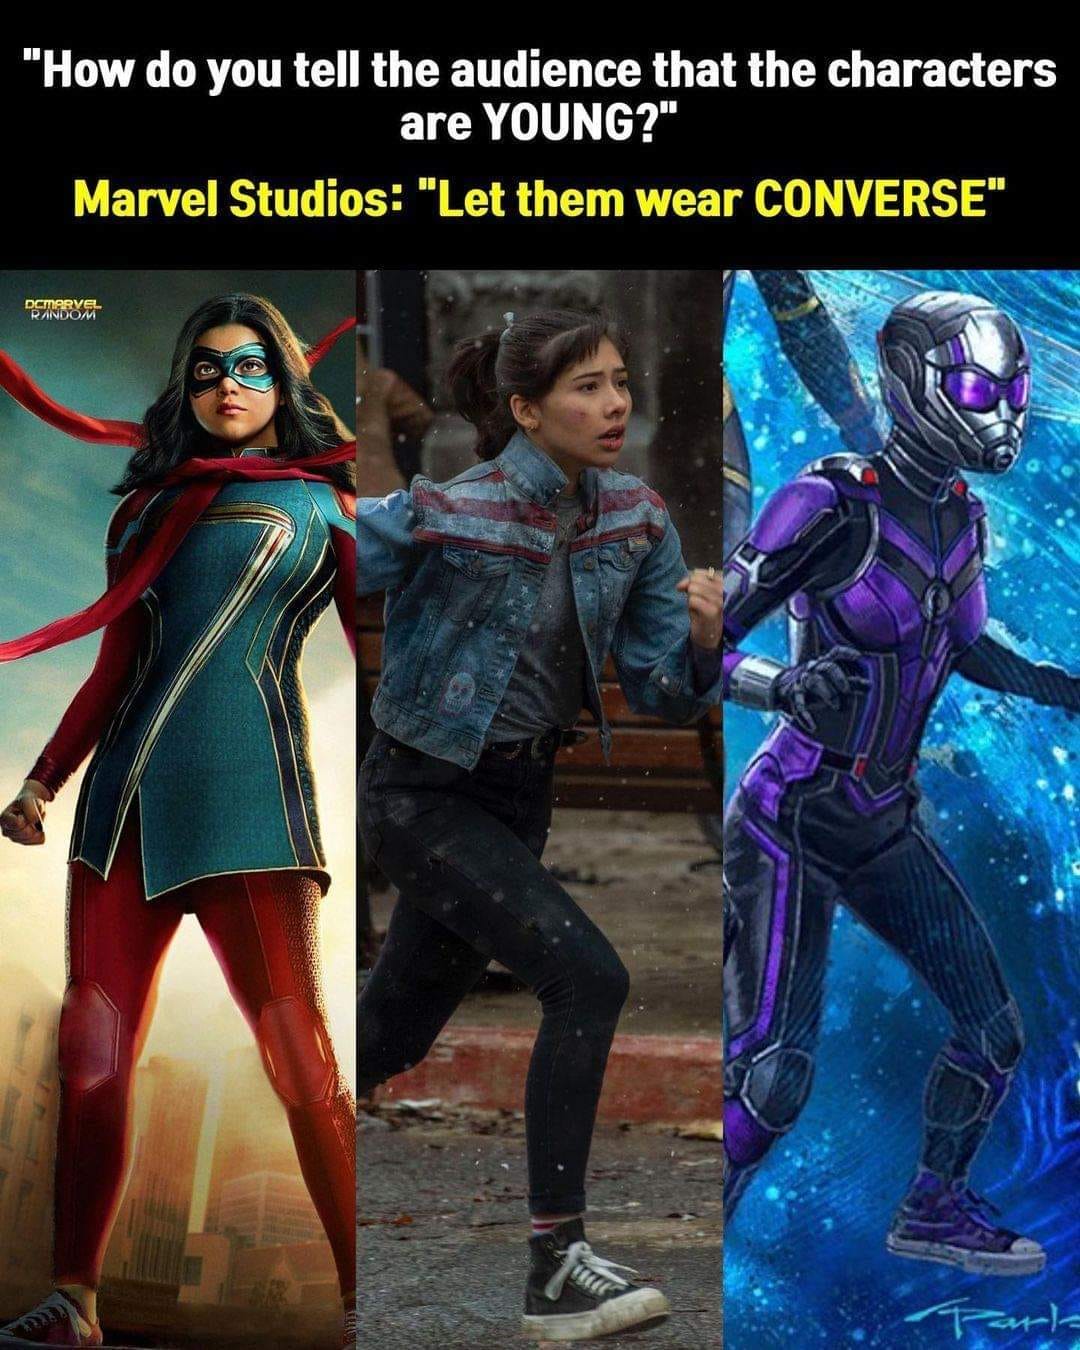 Young Marvel characters wearing Converse shoes